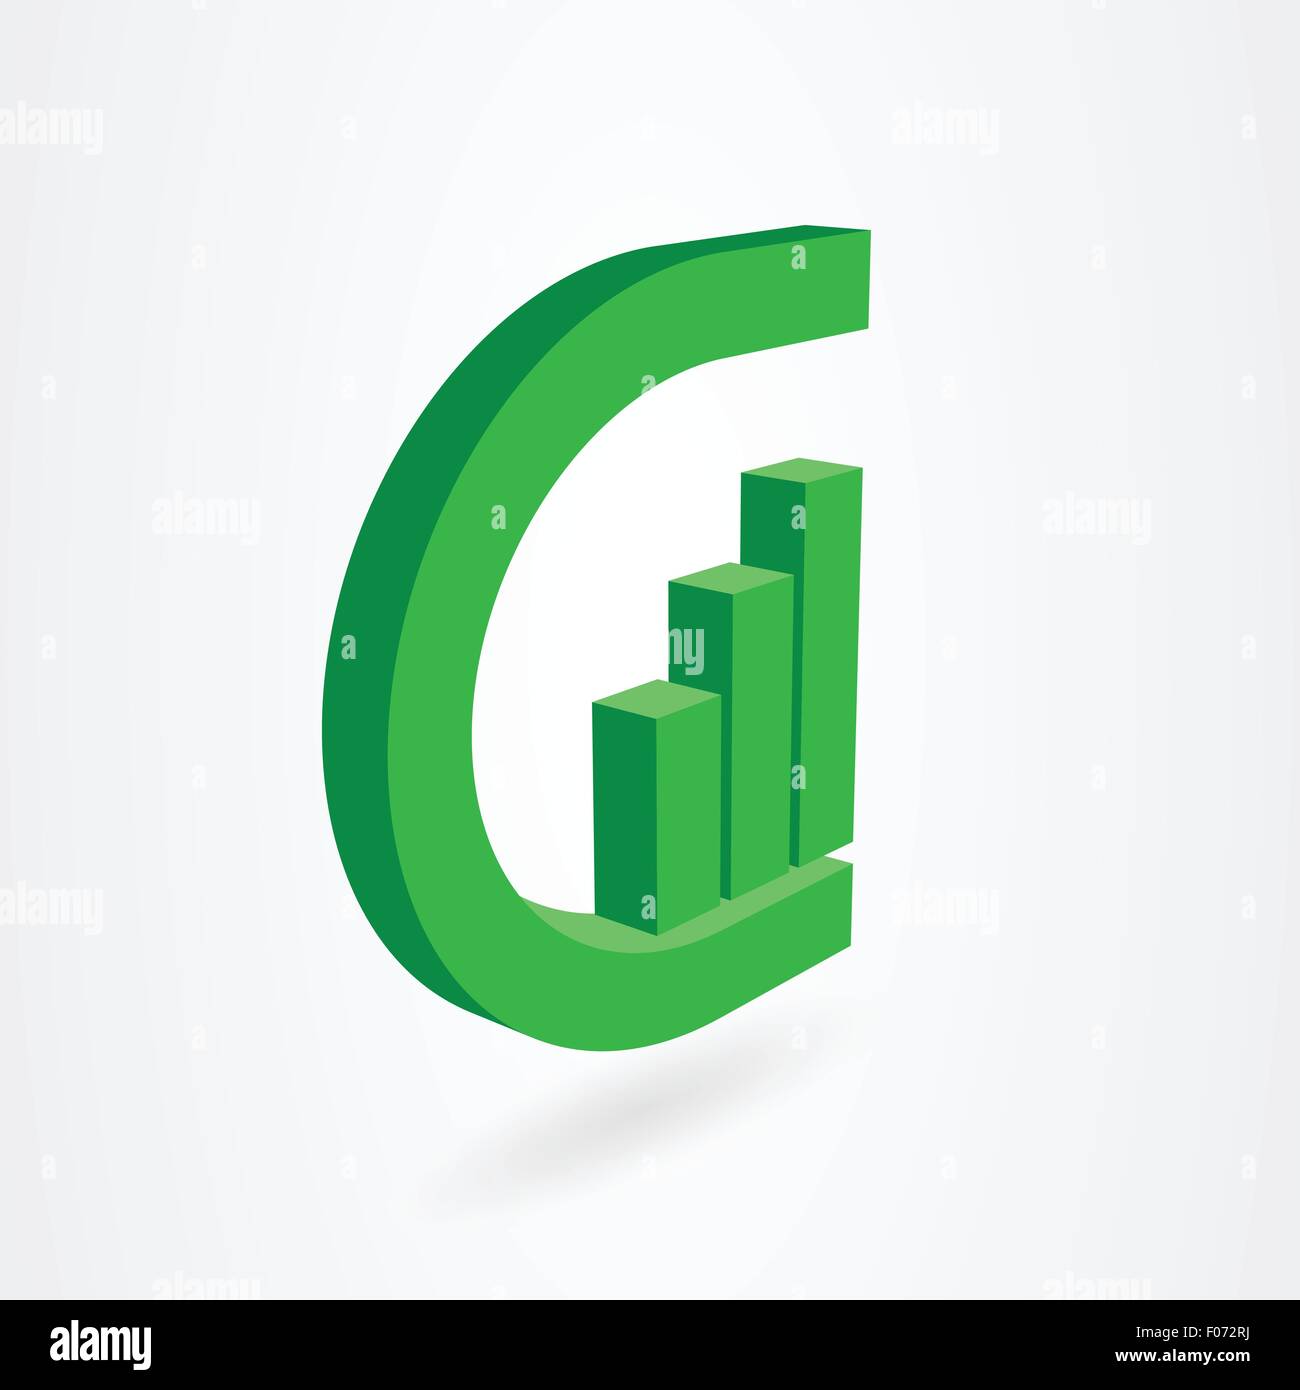 g letter design icon as green environment investment vector illustration Stock Vector